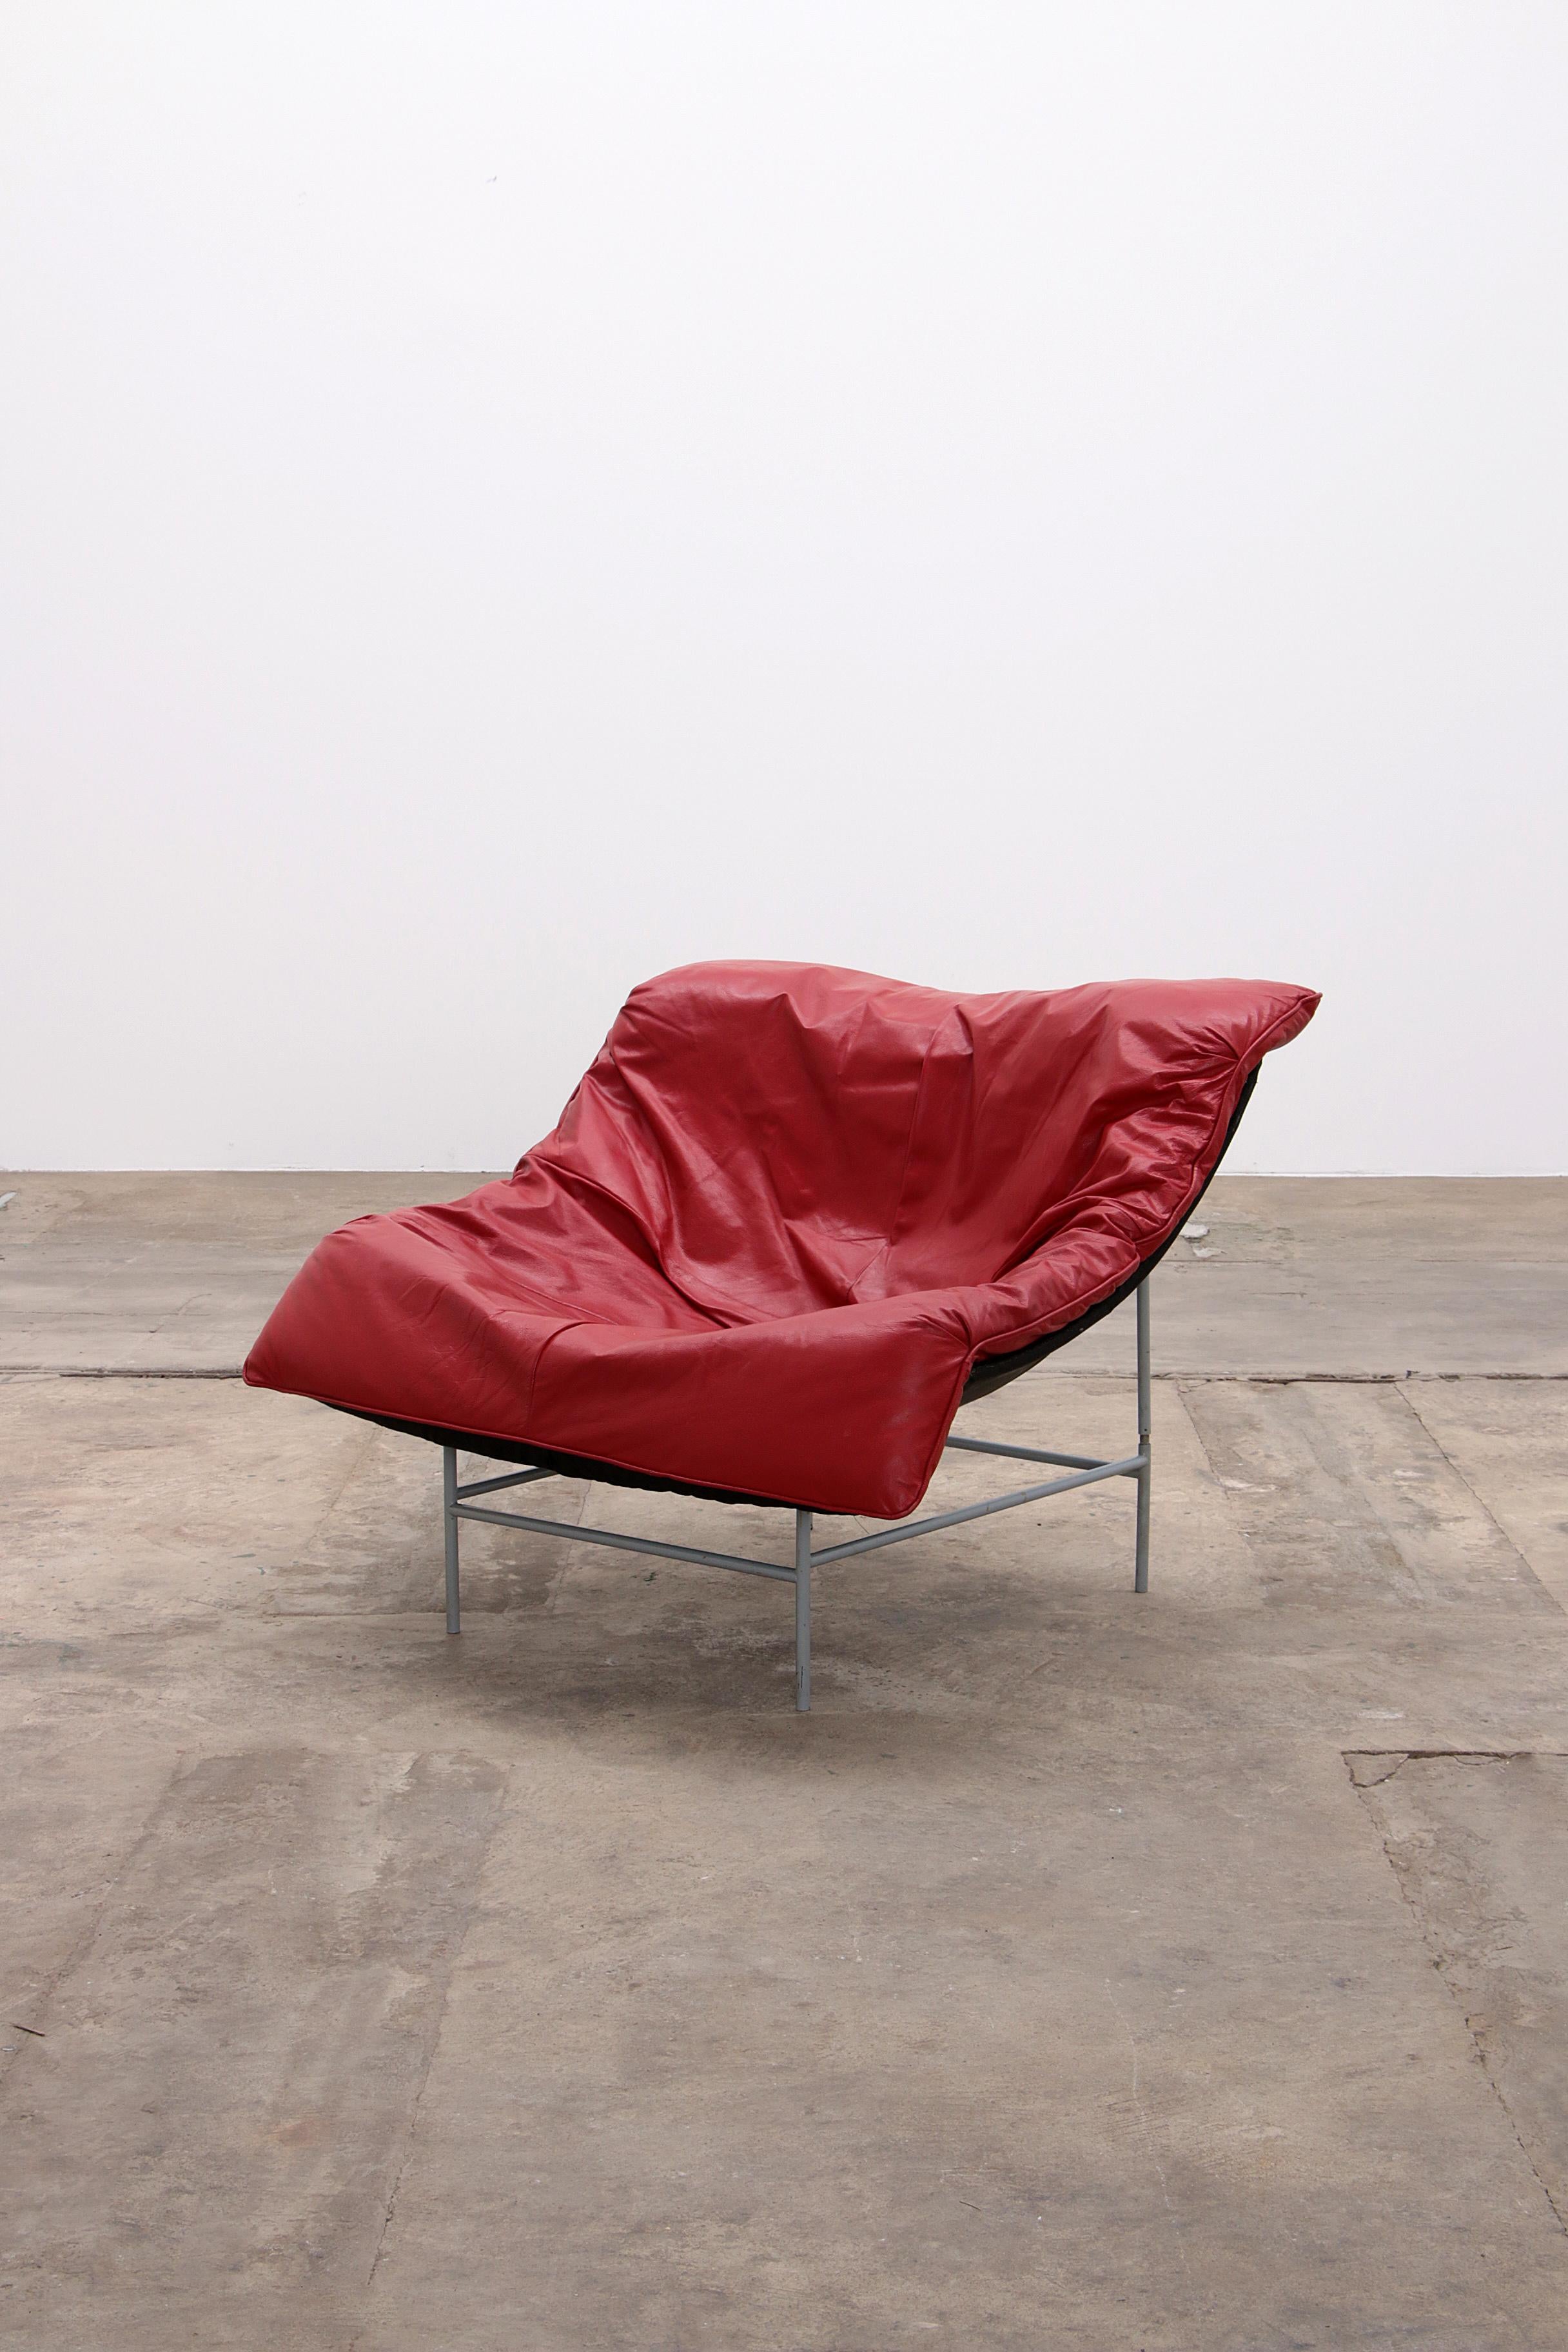 Gerard van den Berg butterfly chair for Montis, 1980 red


Butterfly armchair was designed in the 1980s by Gerard van den Berg and produced by furniture manufacturer Montis. The minimalistic metal frame seems fragile, but is very sturdy. The red